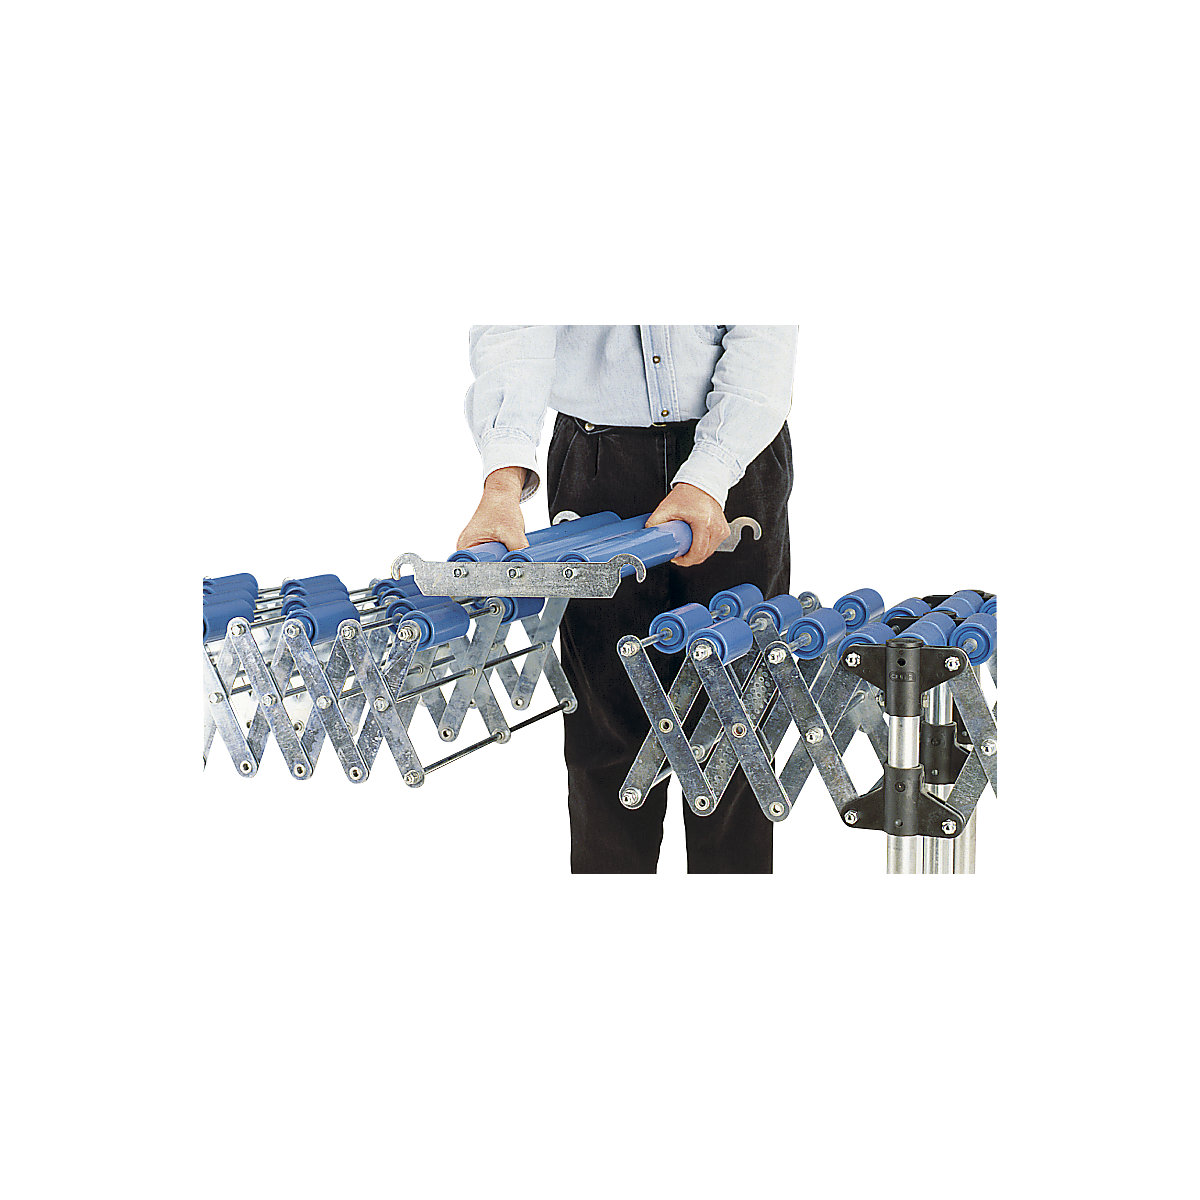 Connecting element for roller conveyor - Gura